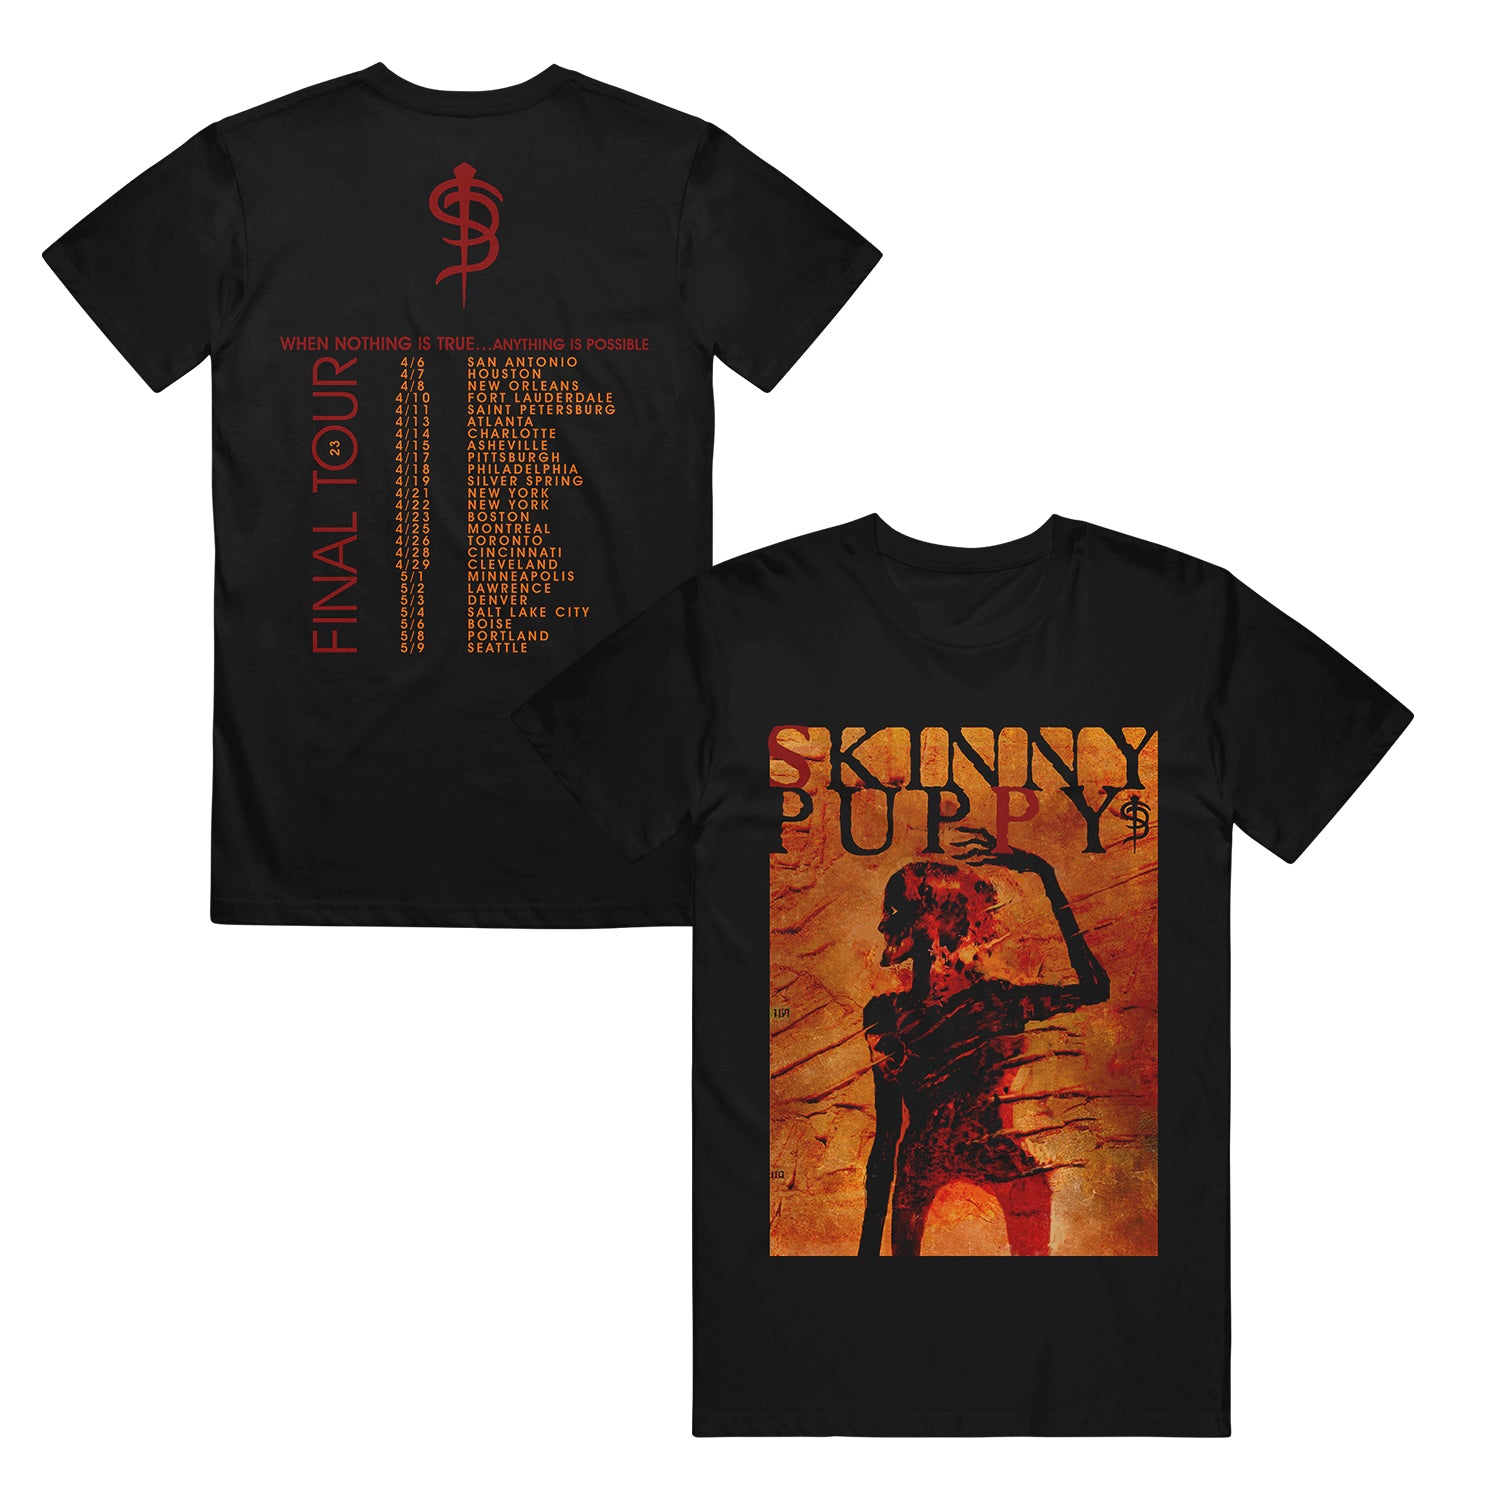 image of the front and back of a black tee shirt on a white background. back is on the left and has the final tour dates and locations of the 2023 tour. front is on the left and has a full body print iof a skeleton. at the top says skinny puppy